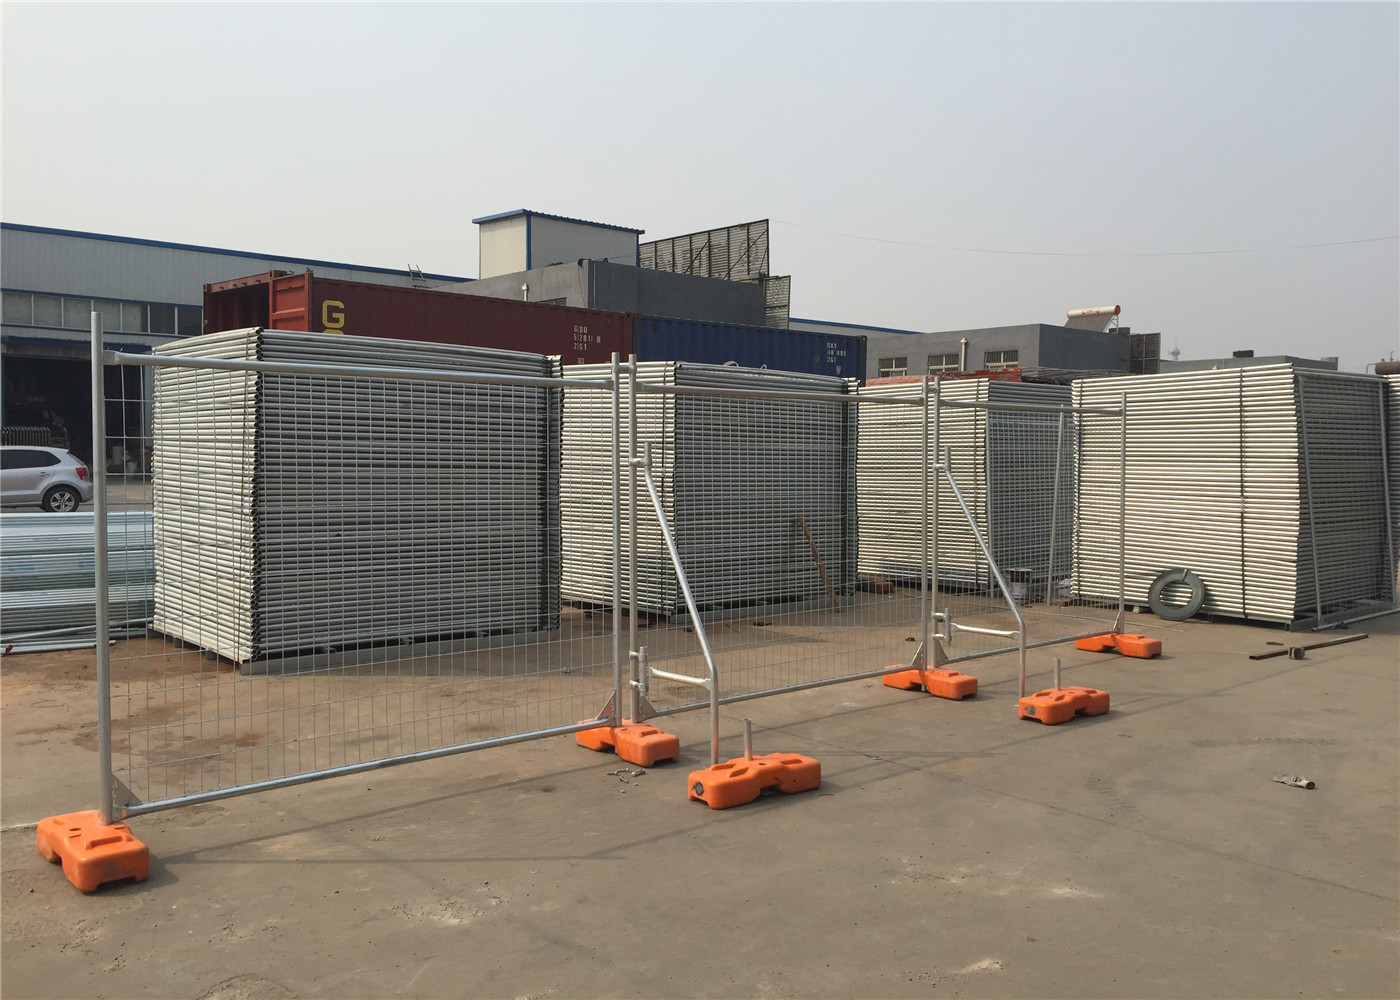  Temporary Fencing Panels SouthLand Imported Fence Panels Low Price 2.1mx3.0m Manufactures